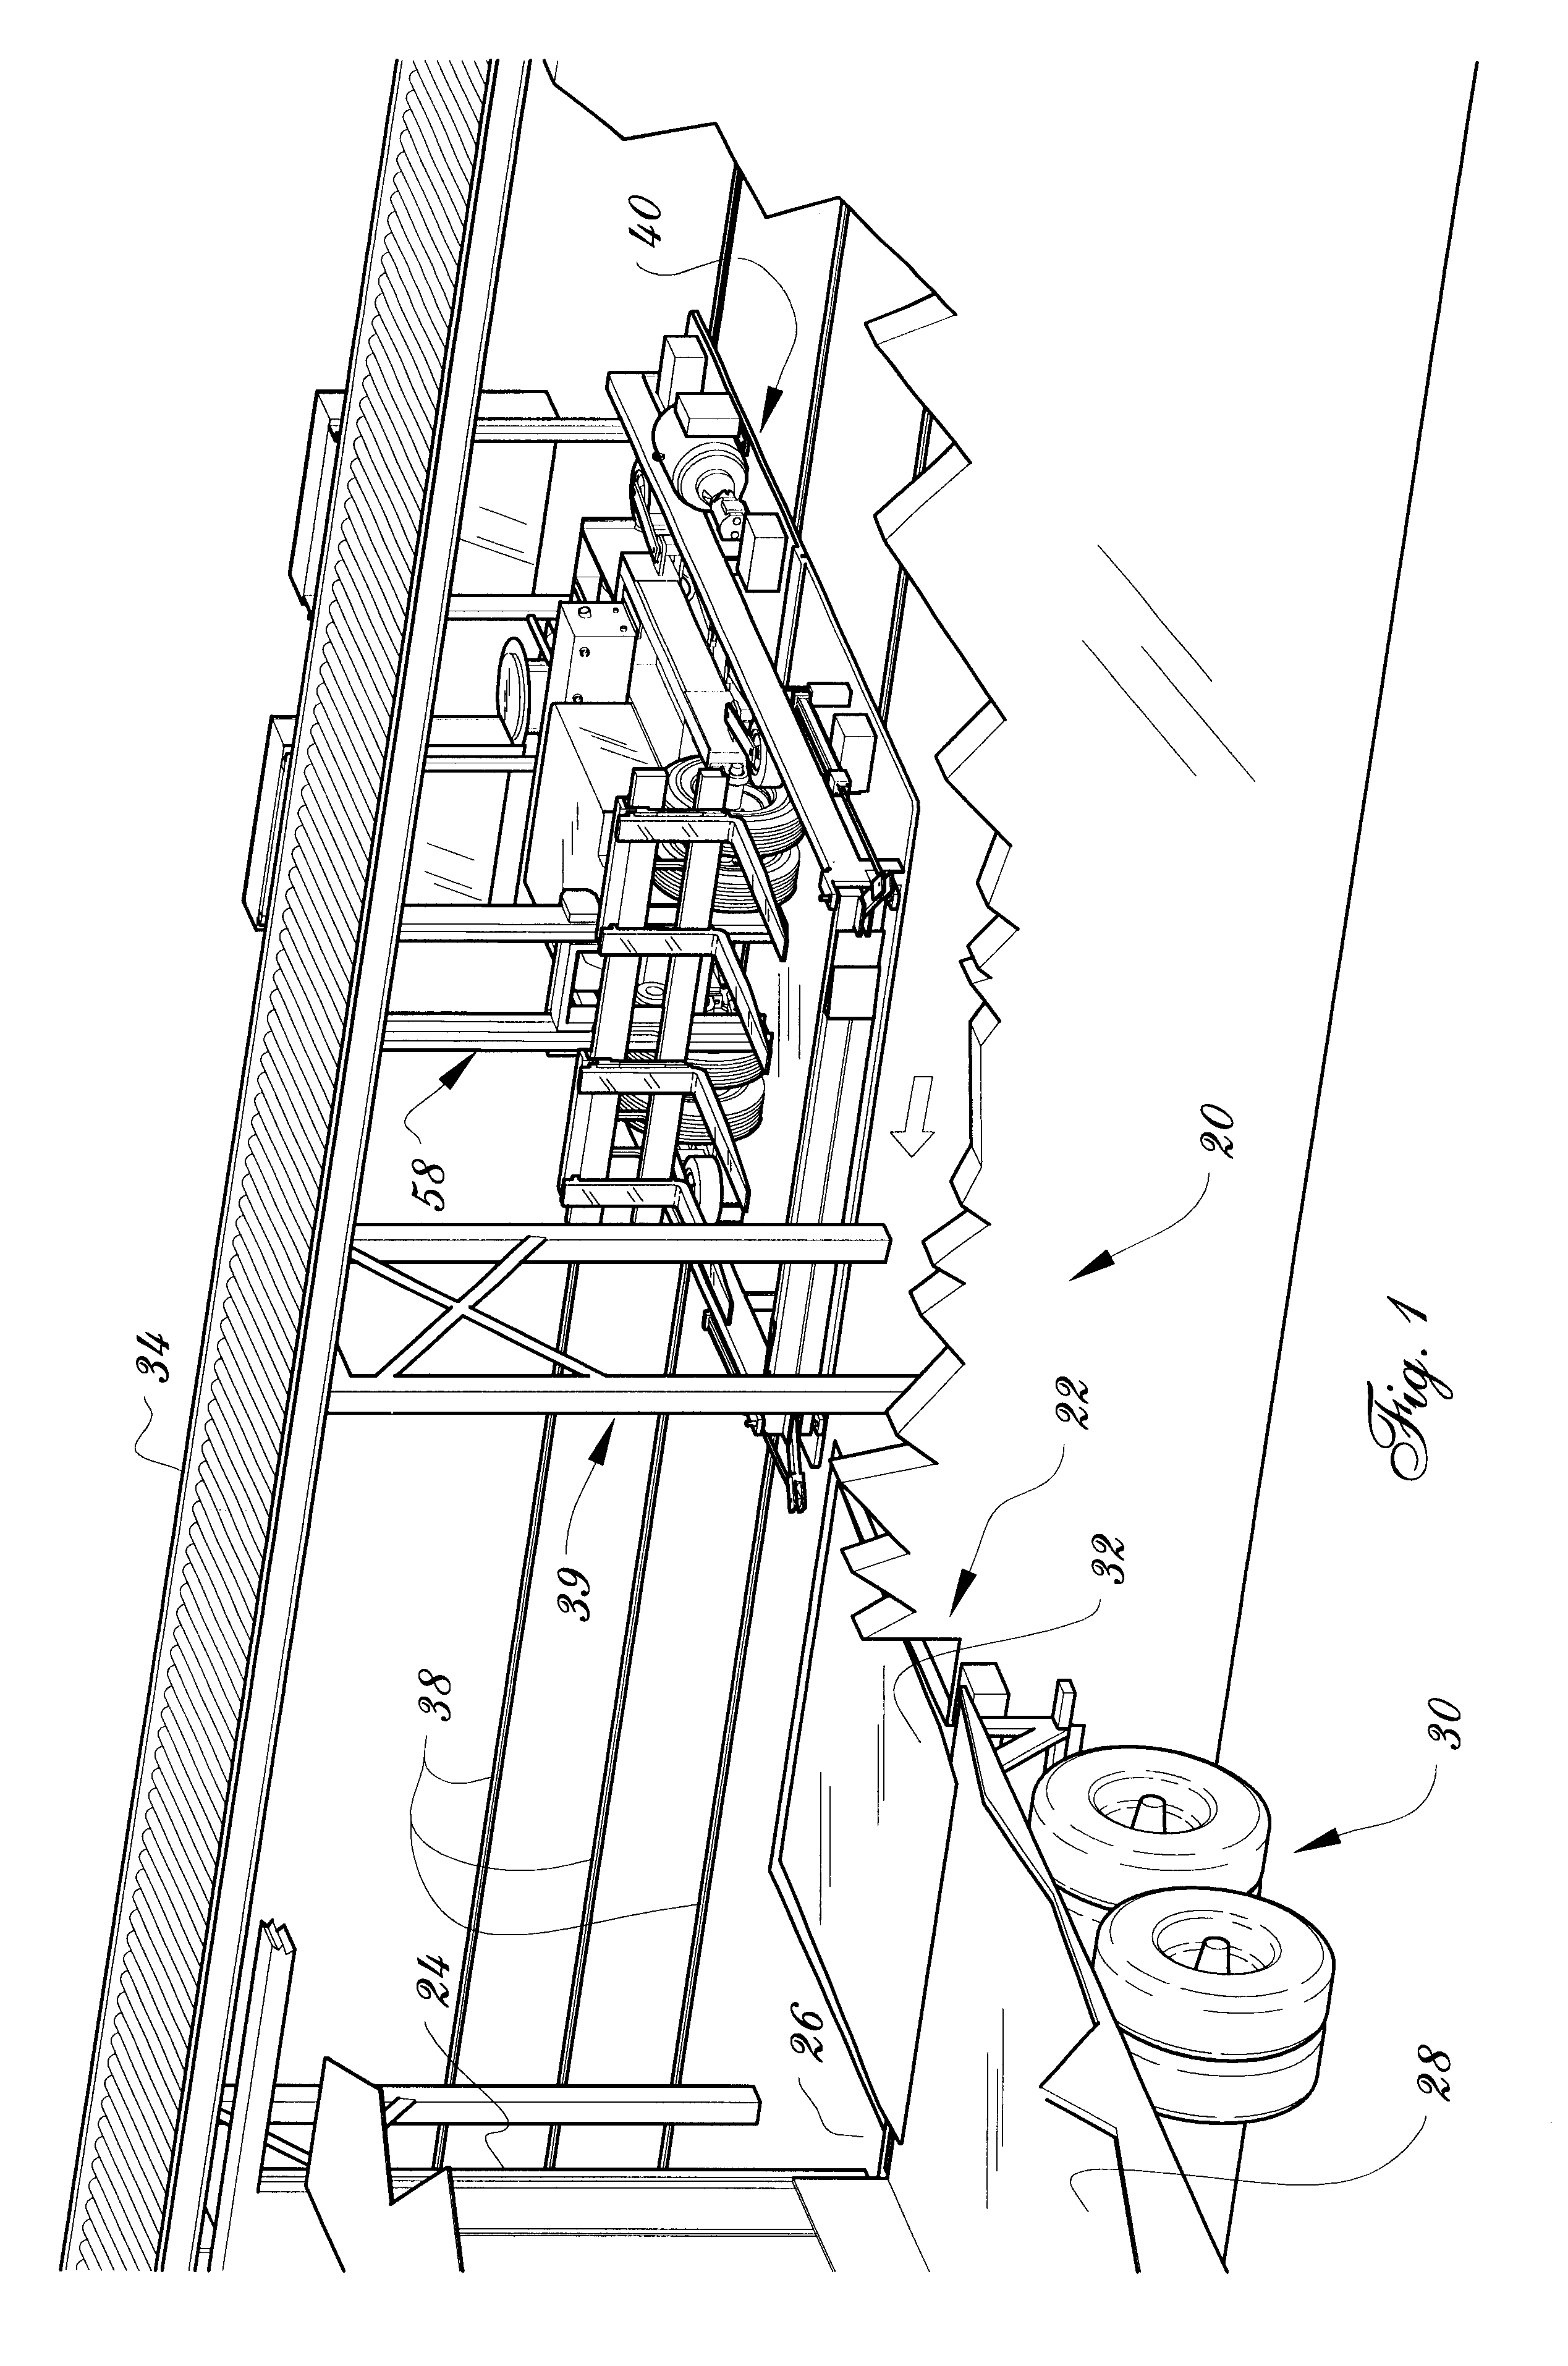 Vehicle loading and unloading system